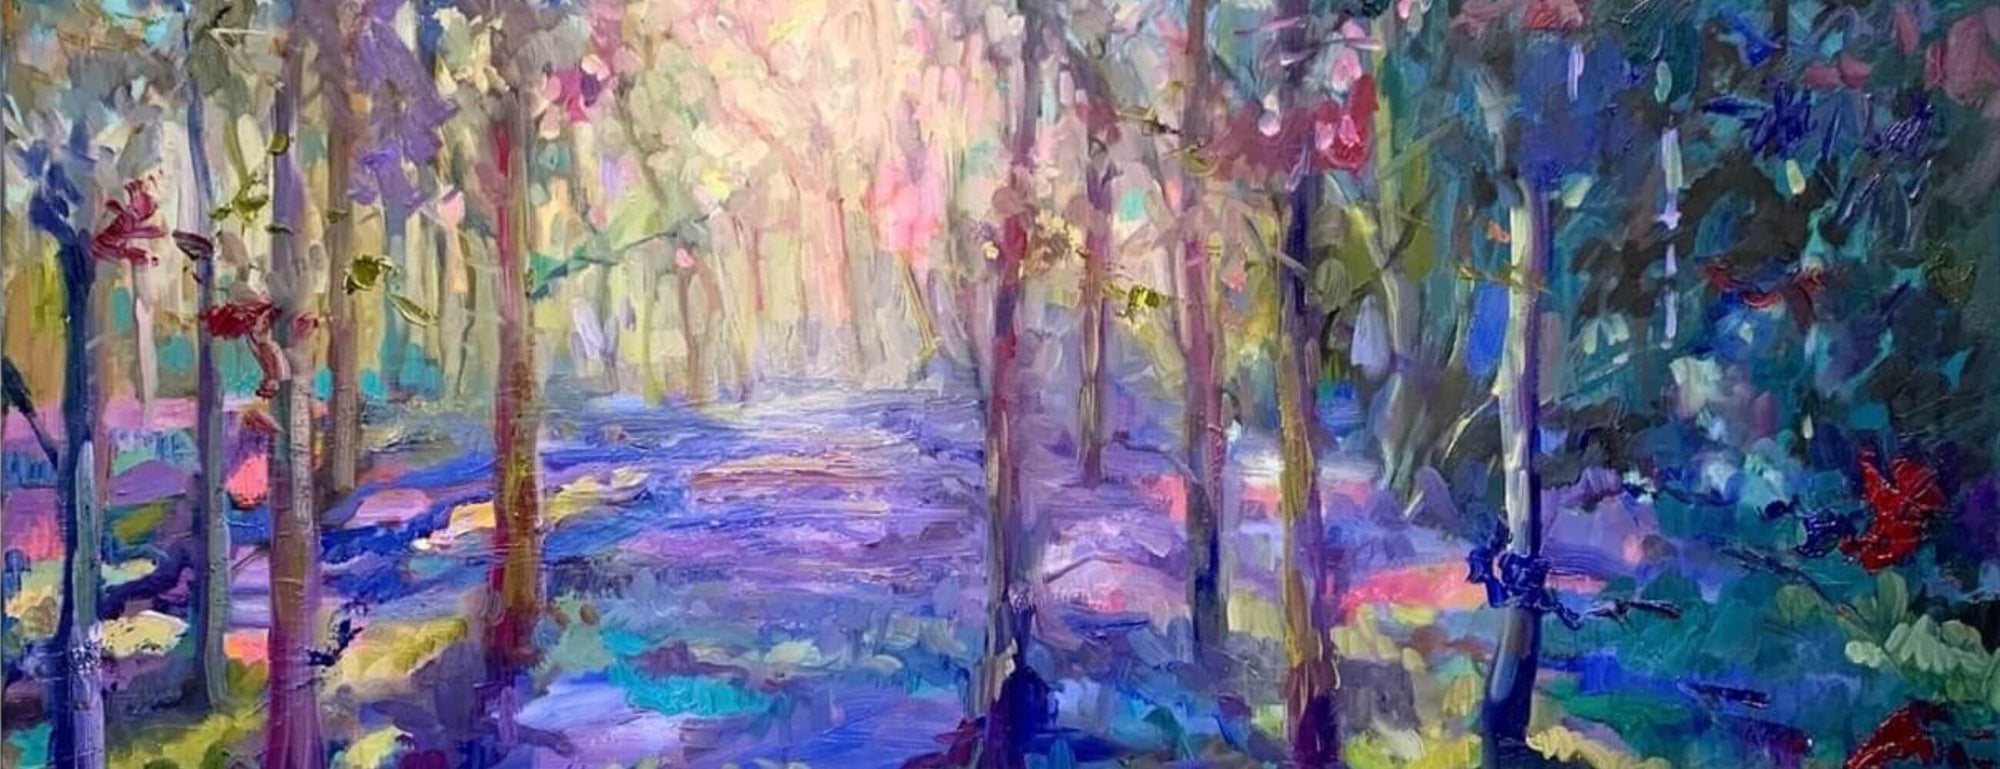 Sue Gardner bluebells in the forest oil painting, available at Ferrers Gallery.